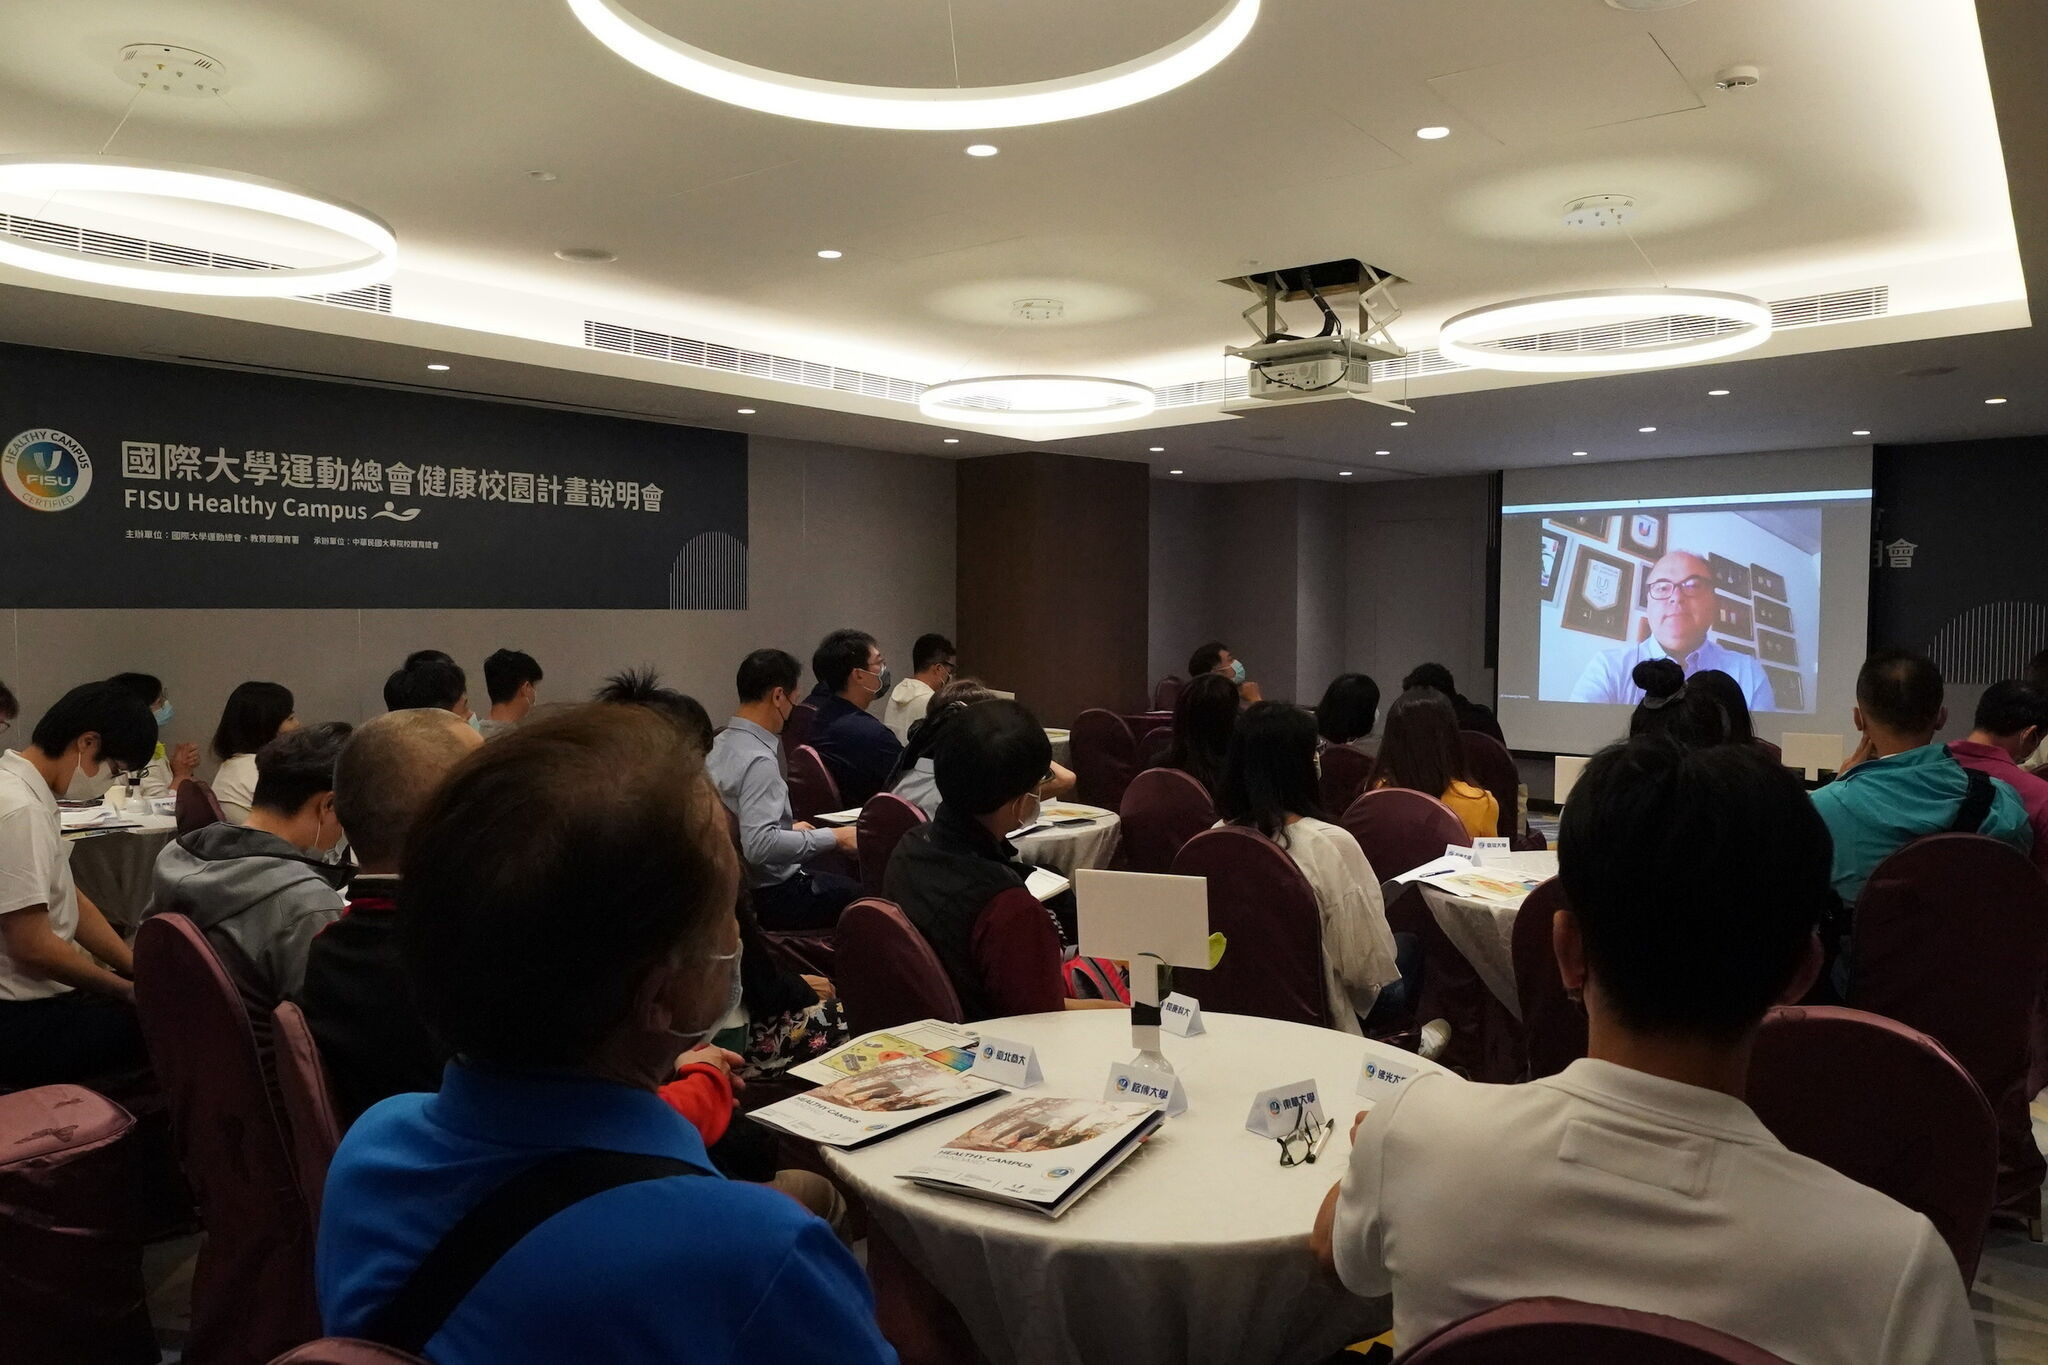 The International University Sports Federation's Healthy Campus programme has been promoted at an event in Taiwan ©FISU